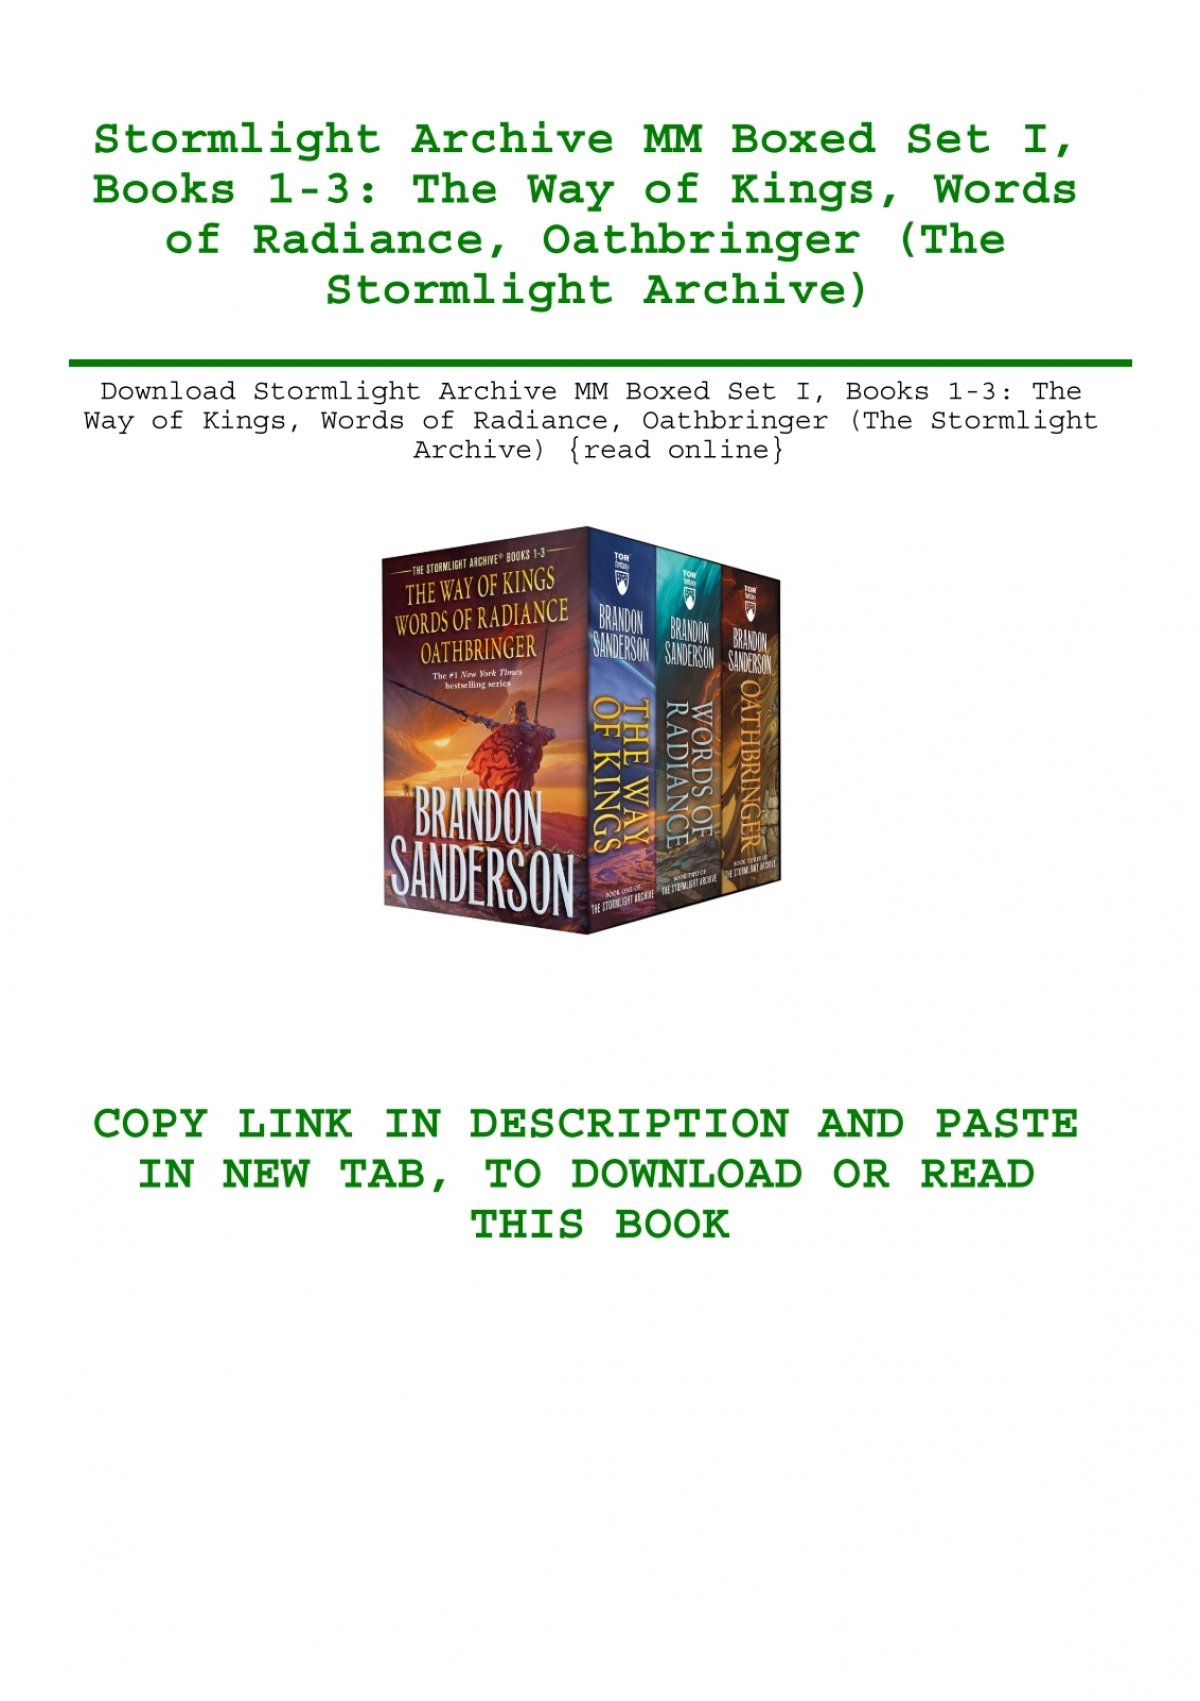 Stormlight Archive MM Boxed Set I, Books 1-3: The Way of Kings